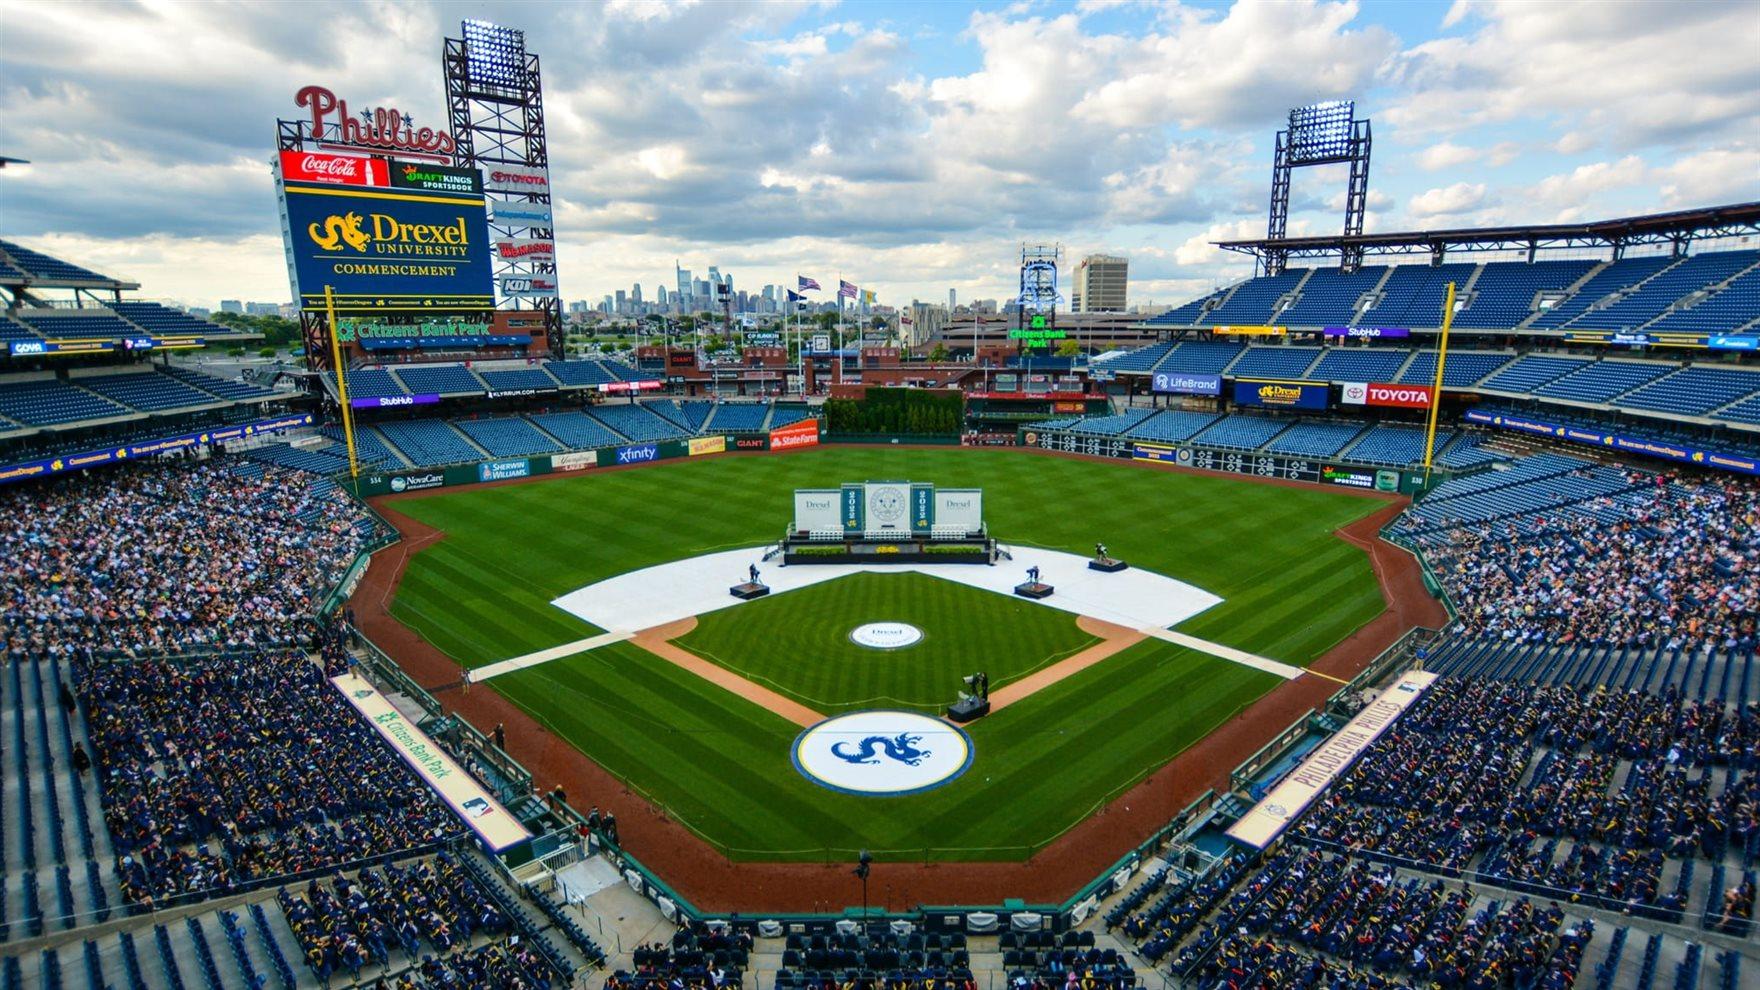 The scene at Citizens Bank Park during Drexel&#39;s June 9 Commencement.